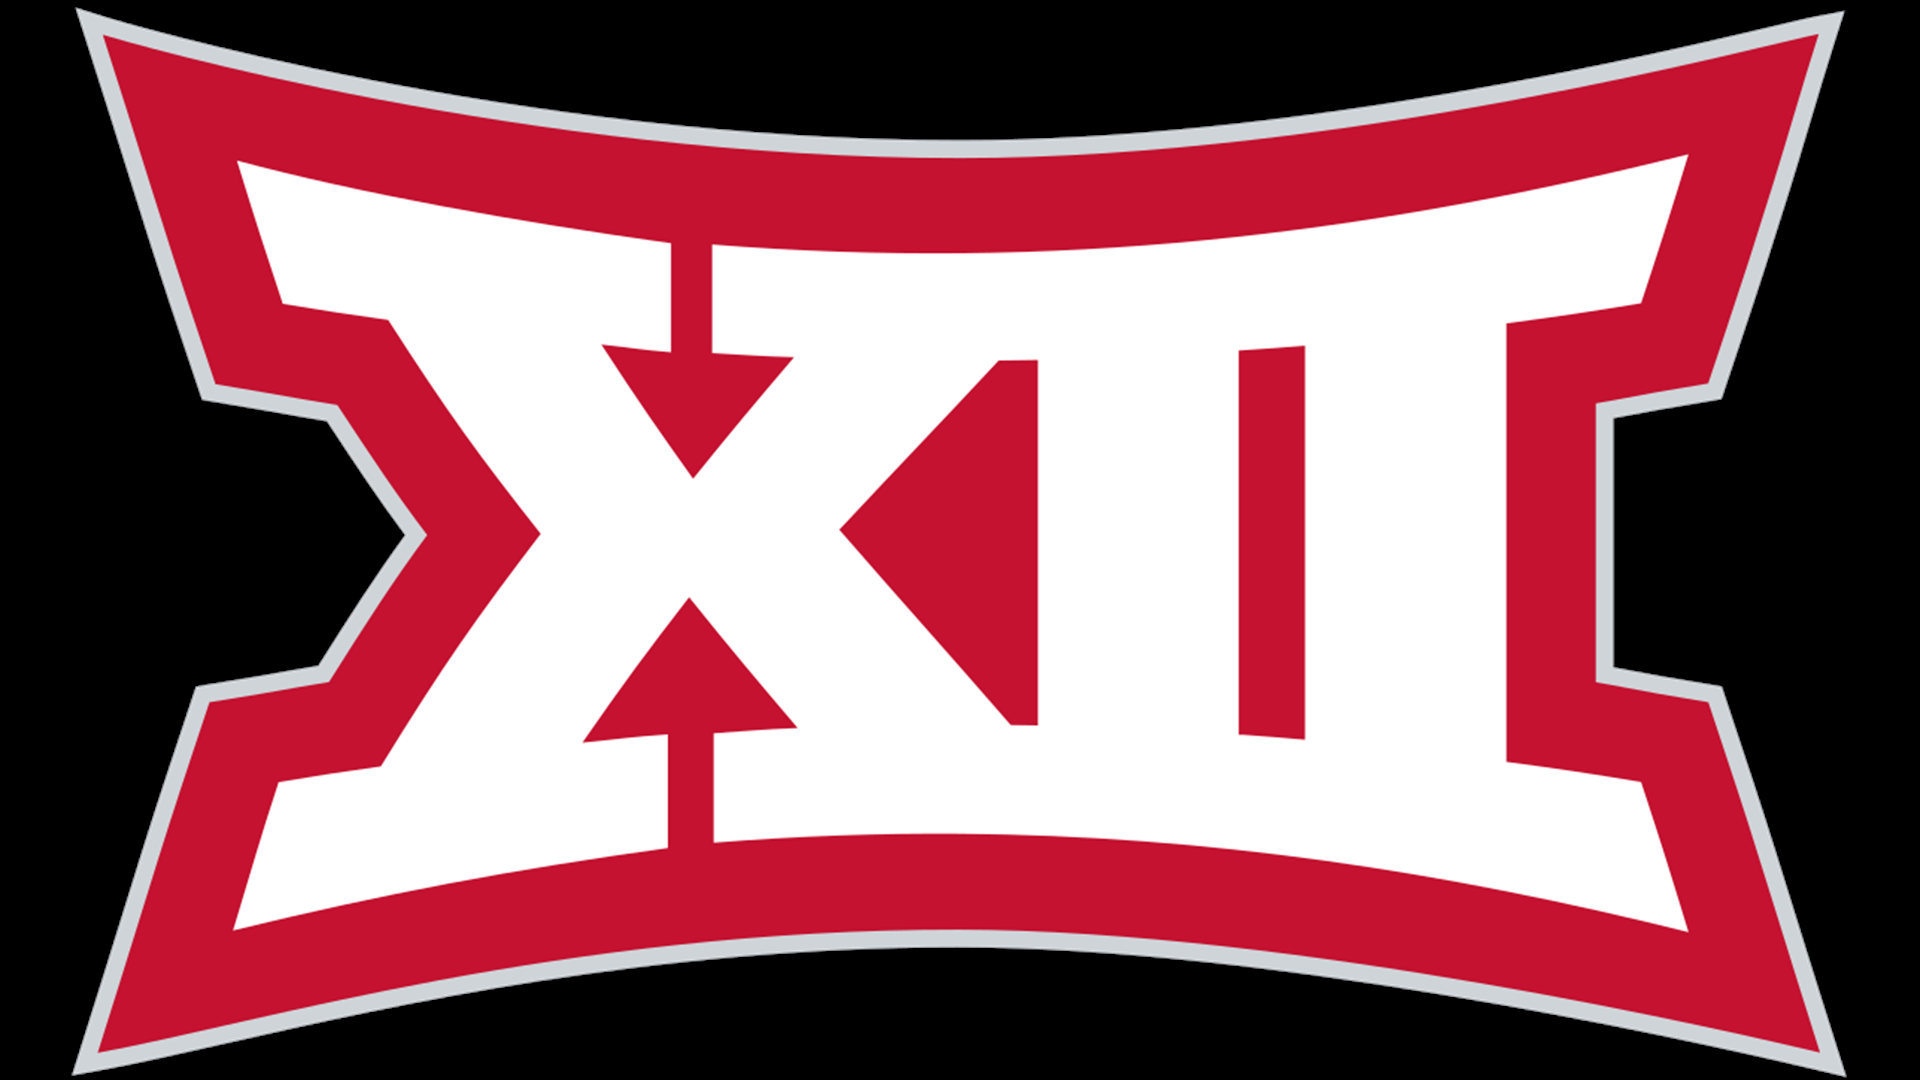 Defending Big 12 champ Oklahoma is expected to repeat, while Baylor is slated to finish sixth in the conference.